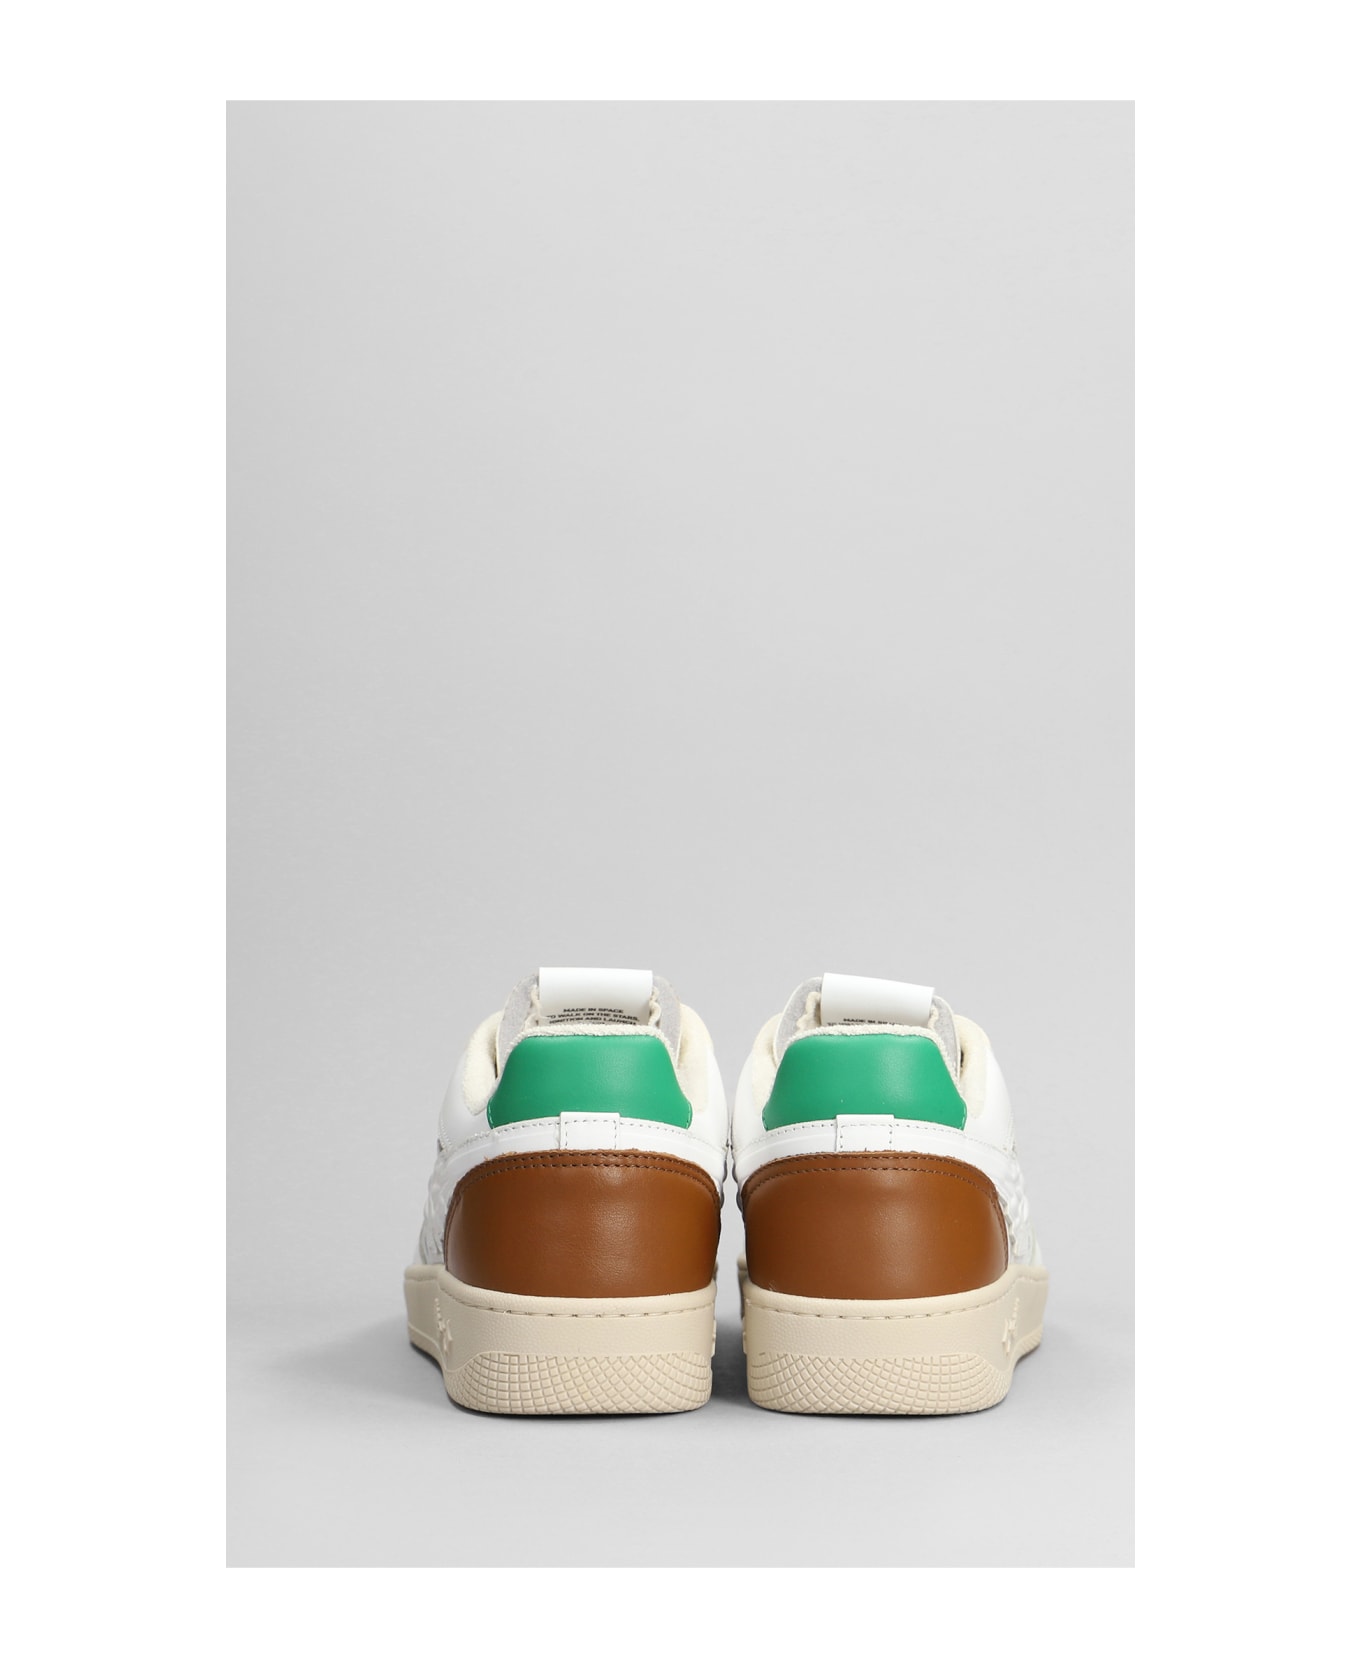 Enterprise Japan Sneakers In White Suede And Leather - white